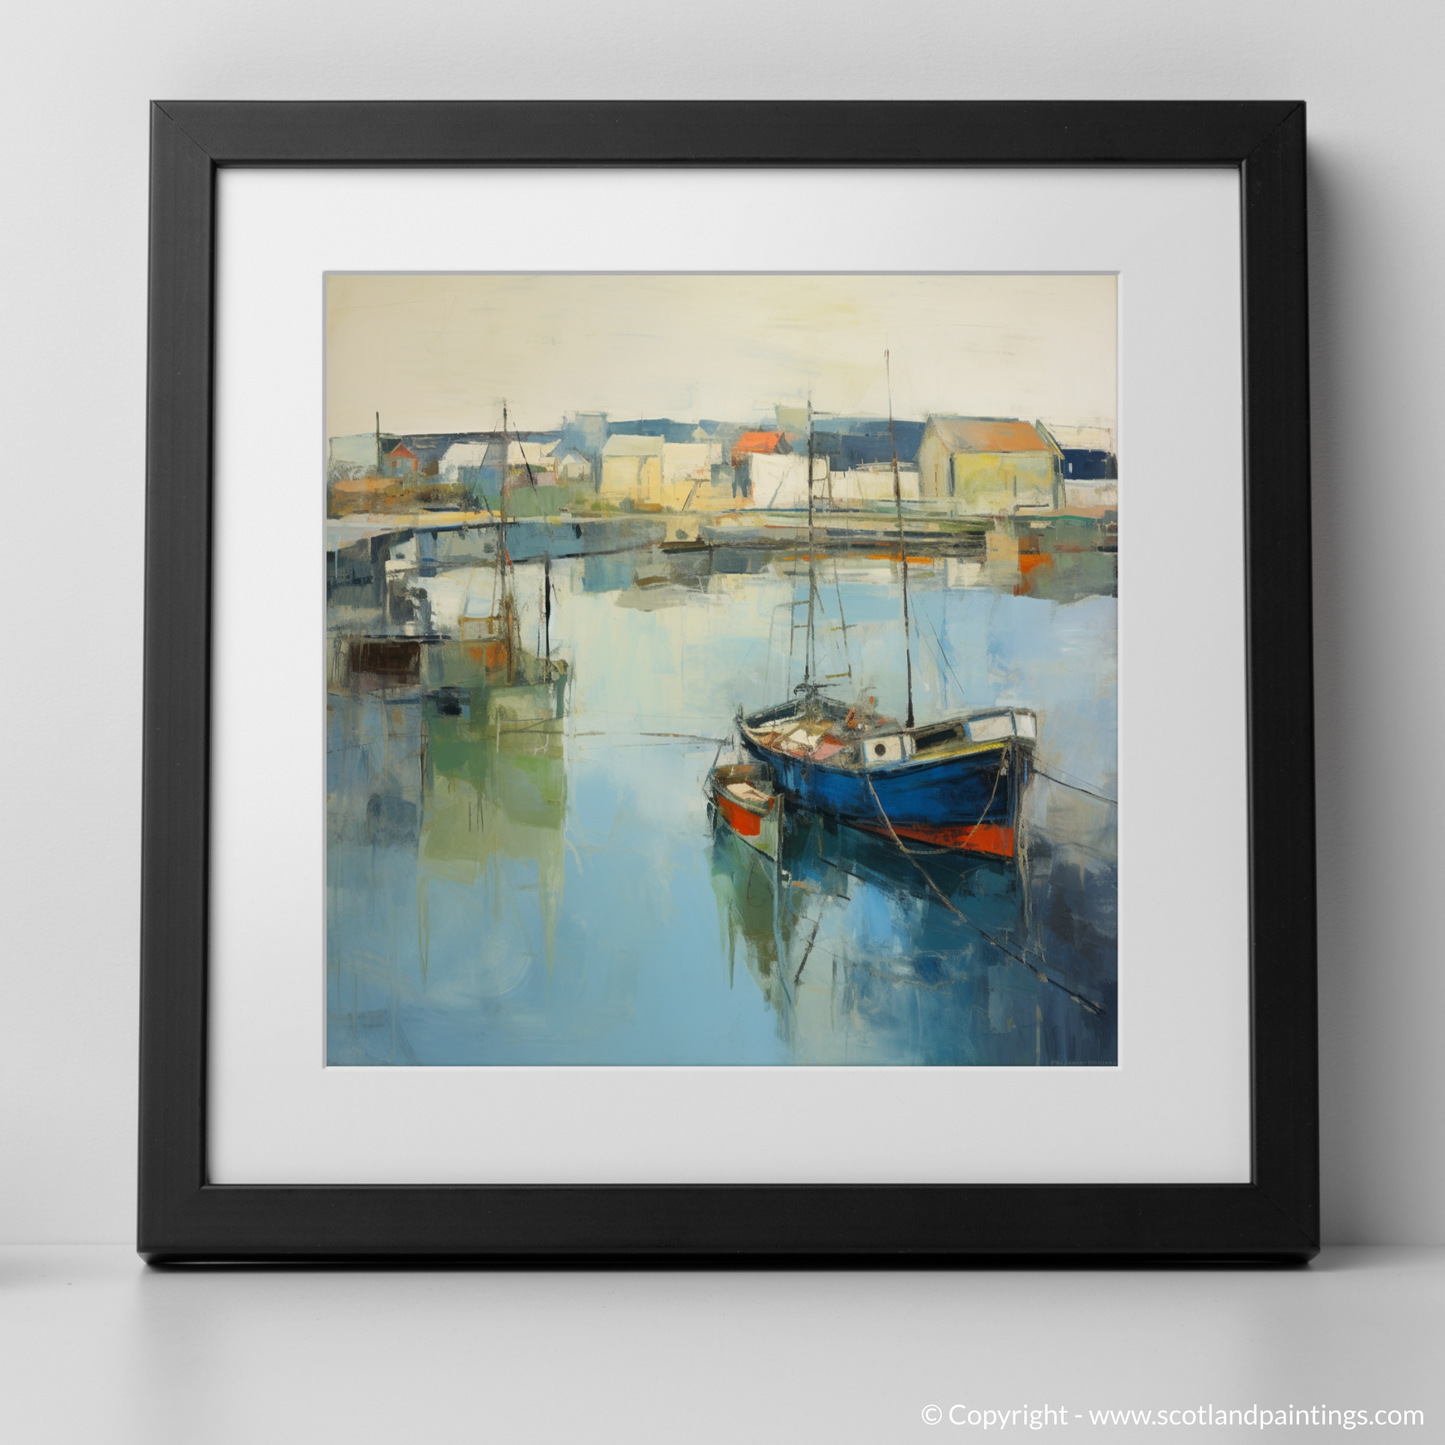 Harbour Serenity: An Abstract Impression of Stornoway